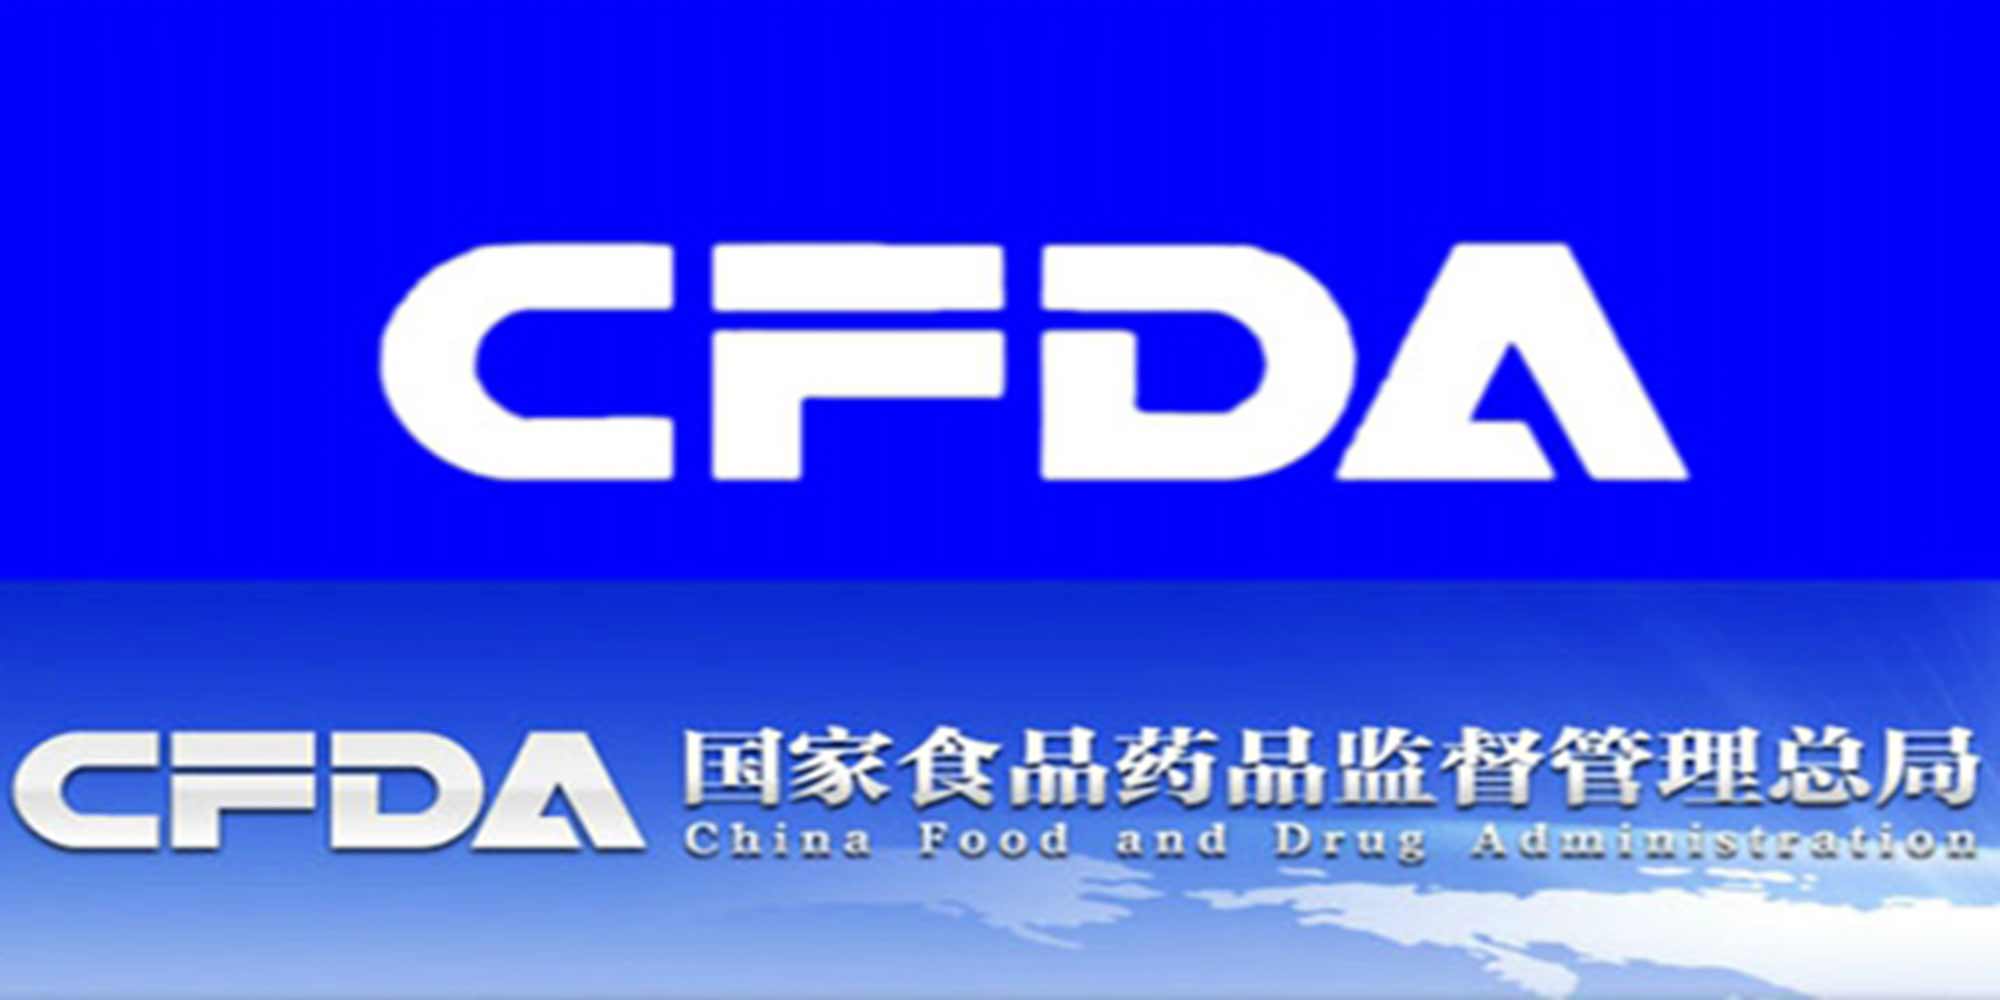 China Food and Drug Administration: What’s new?